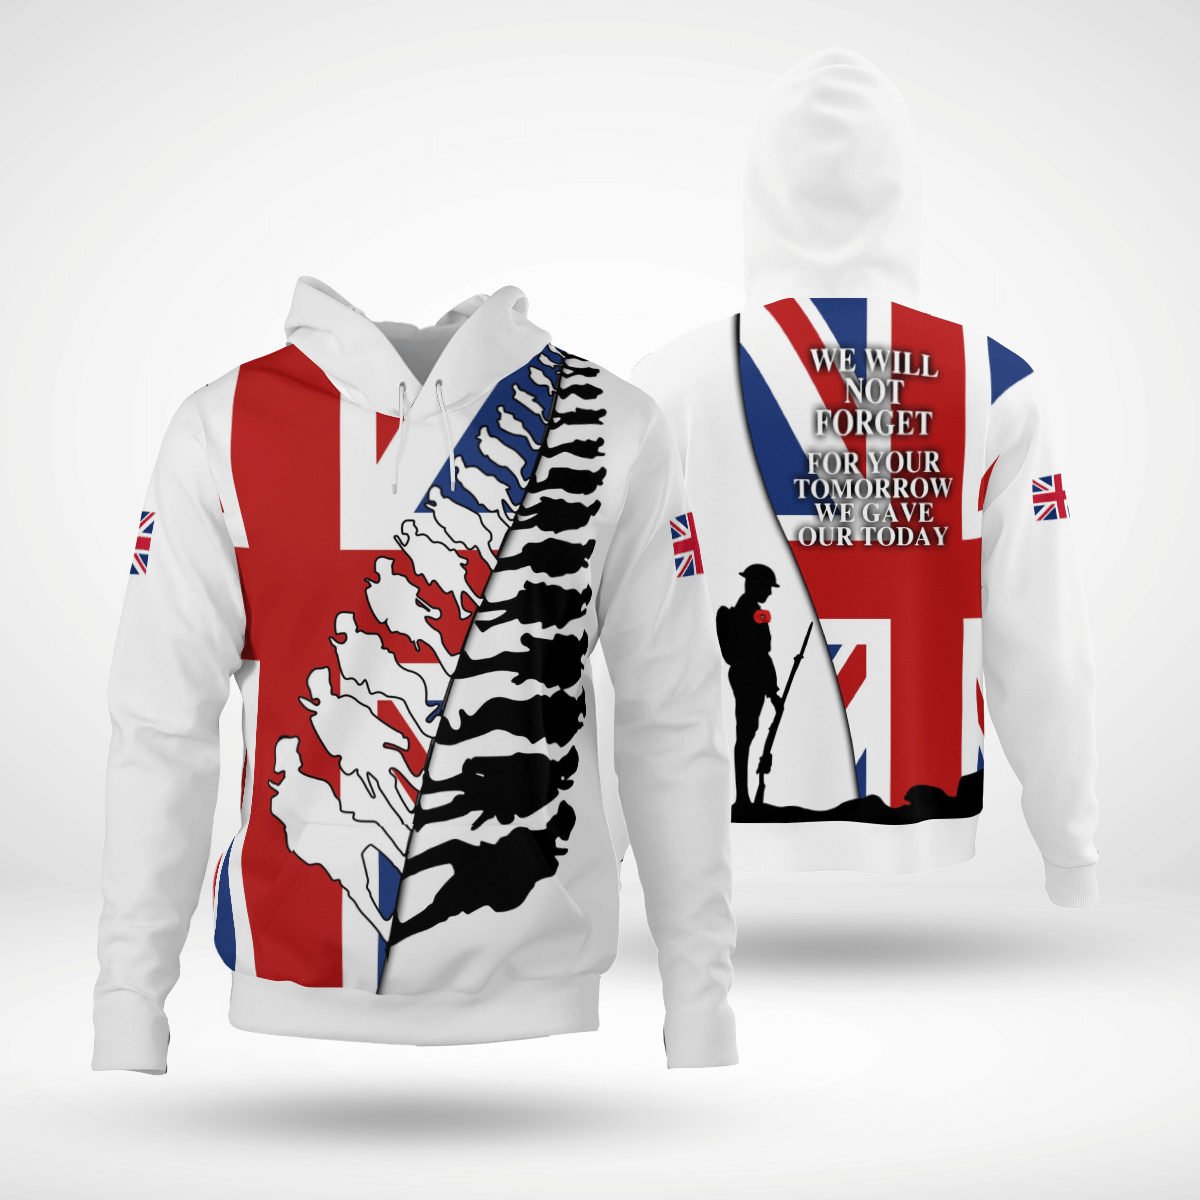 UK veteran remembrance day we will not forget hoodie and shirt 6